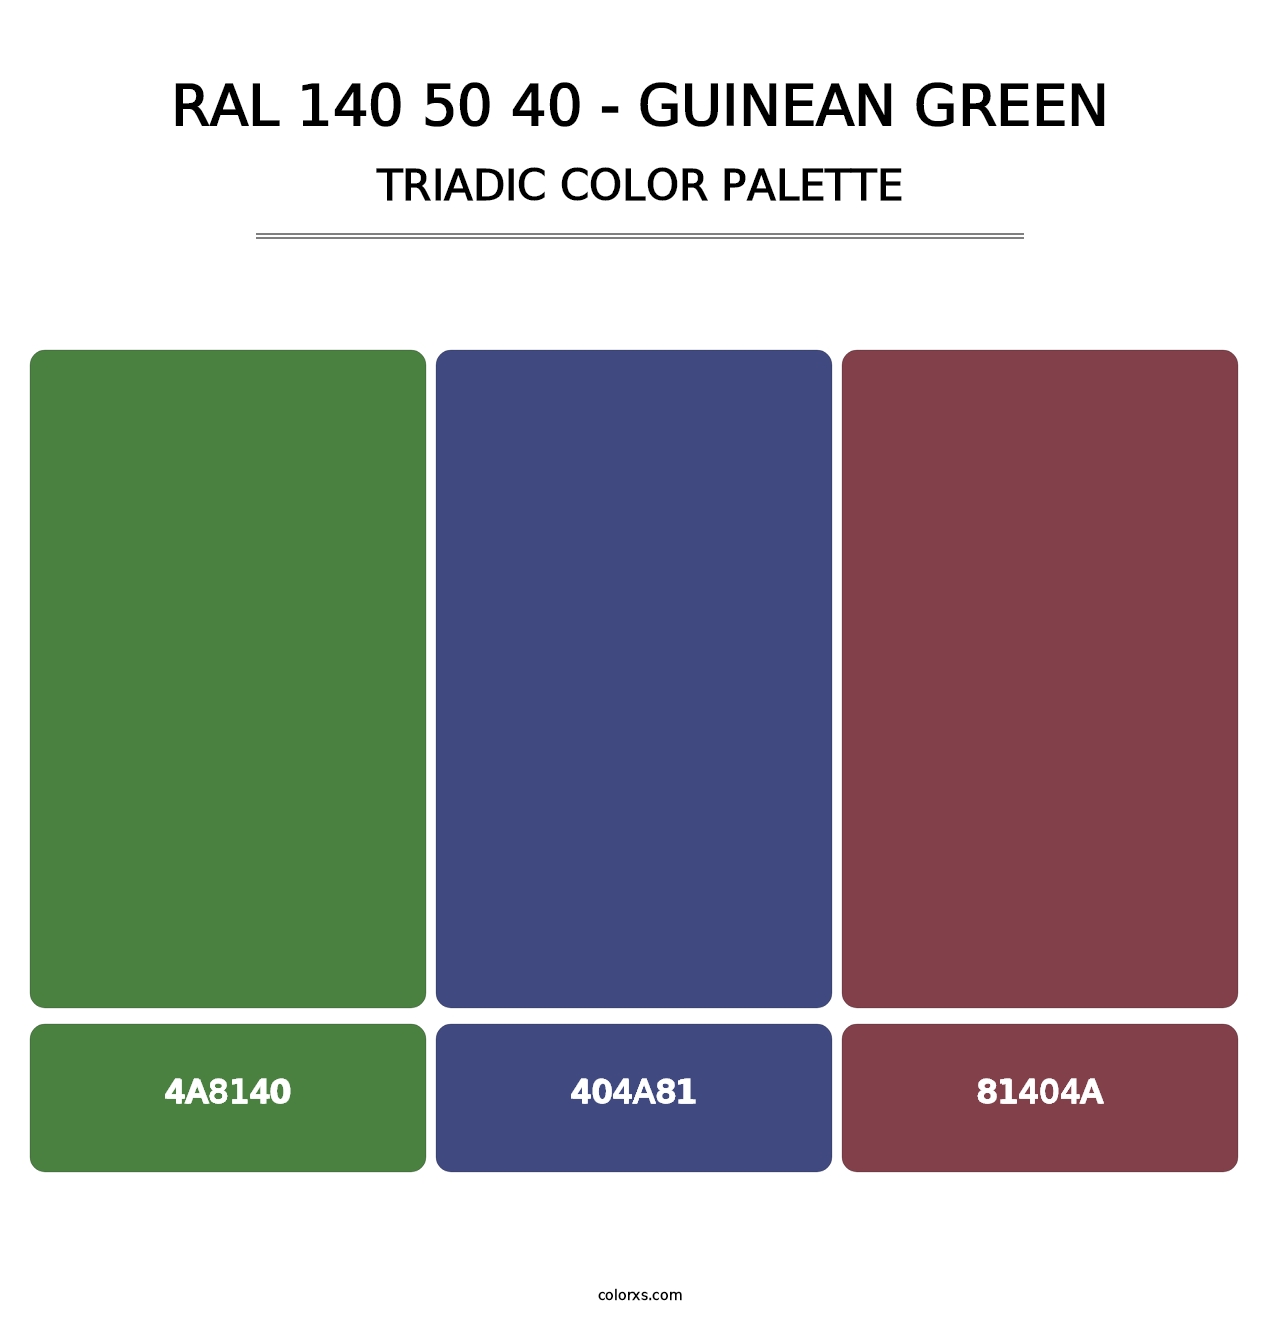 RAL 140 50 40 - Guinean Green - Triadic Color Palette